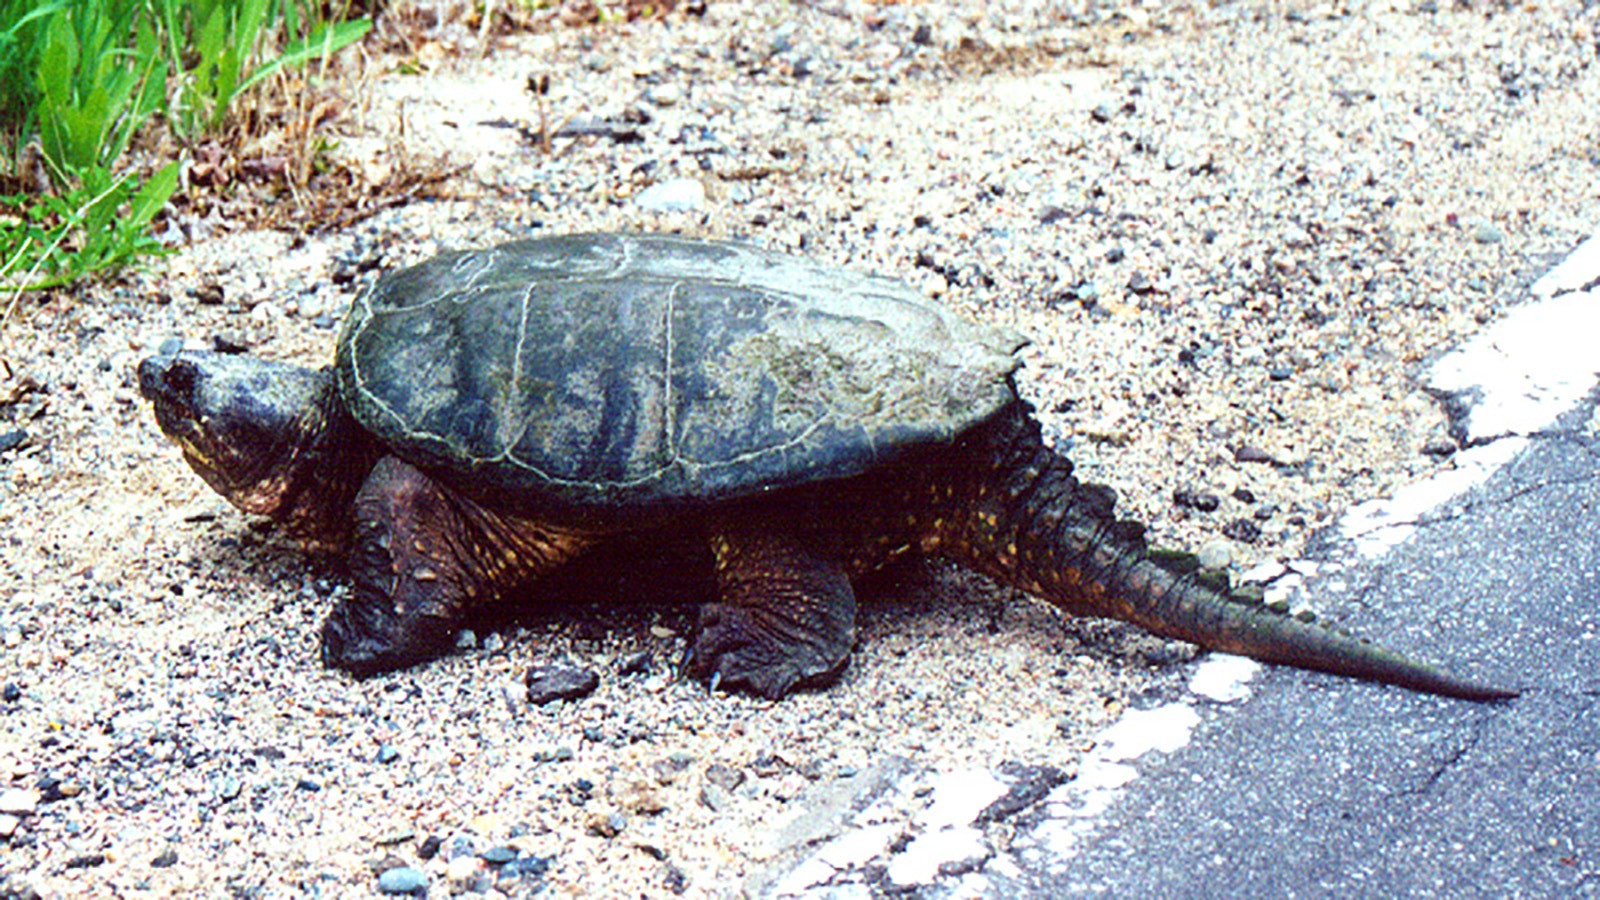 Common snapping turtles are found around Wyoming, although much smaller than their southern relatives, which can grow to be 100 pounds.